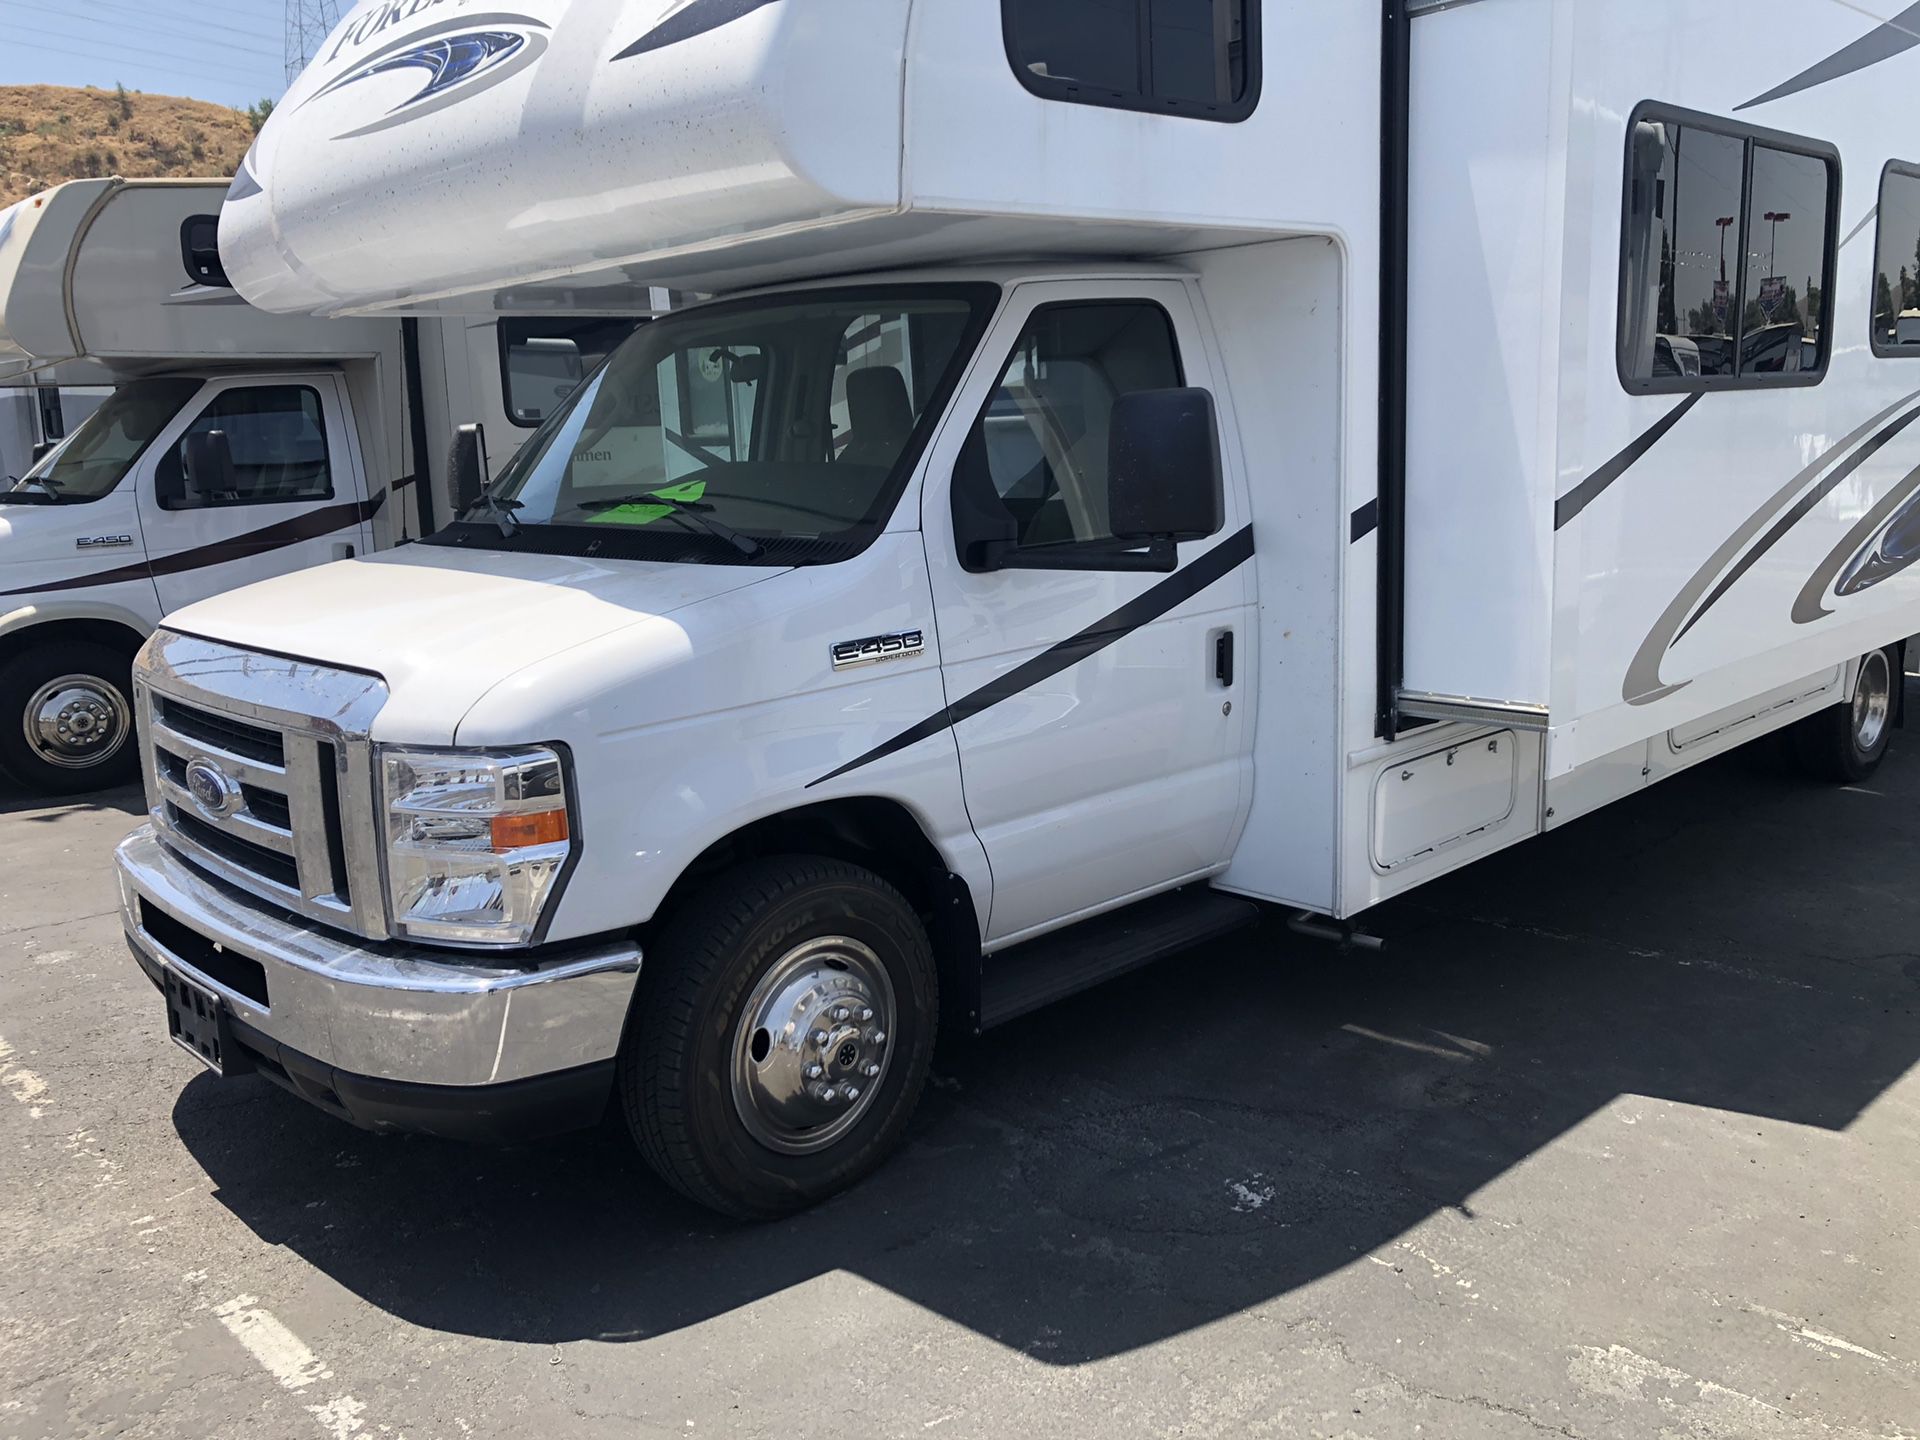 2019 Forest River 2851LE Forester 30ft long class C RV